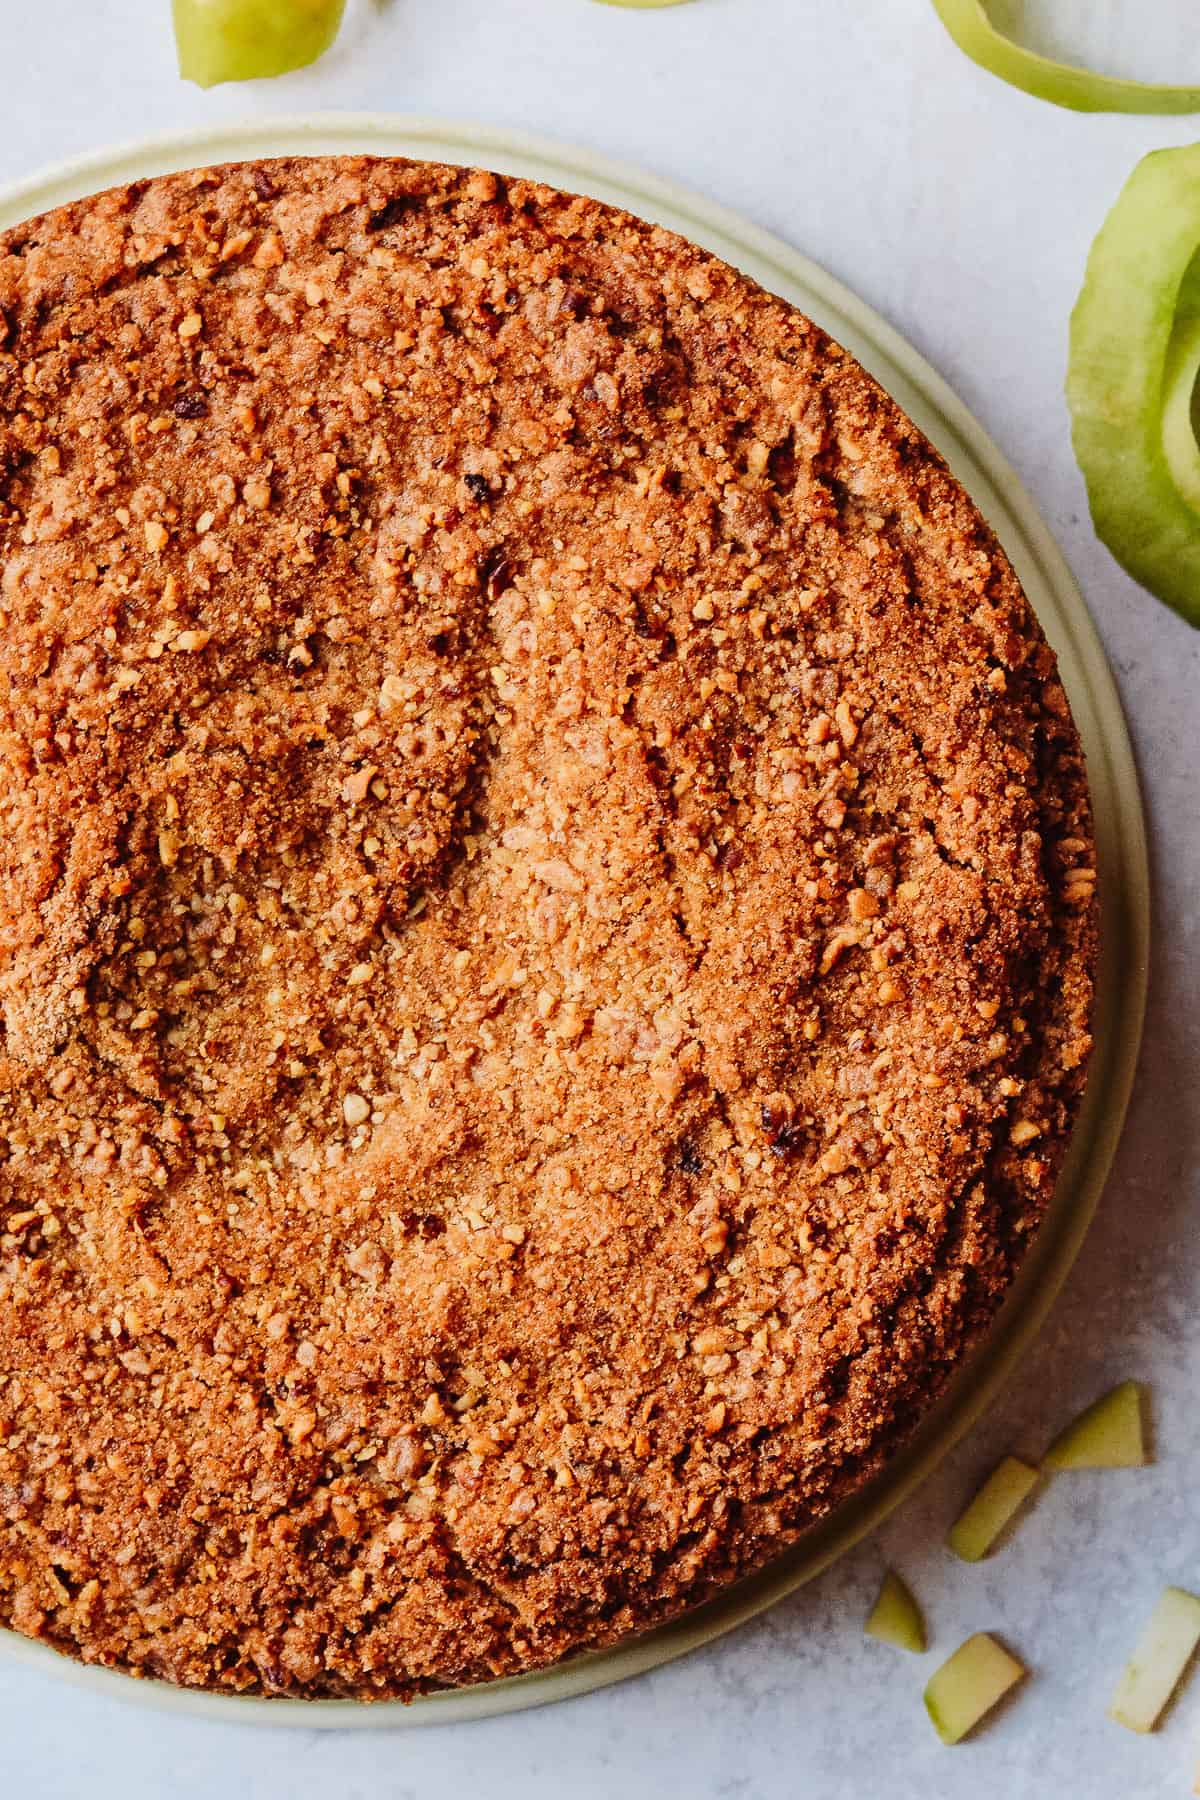 Perfectly baked apple spice cake on marble counter with apple peel around.